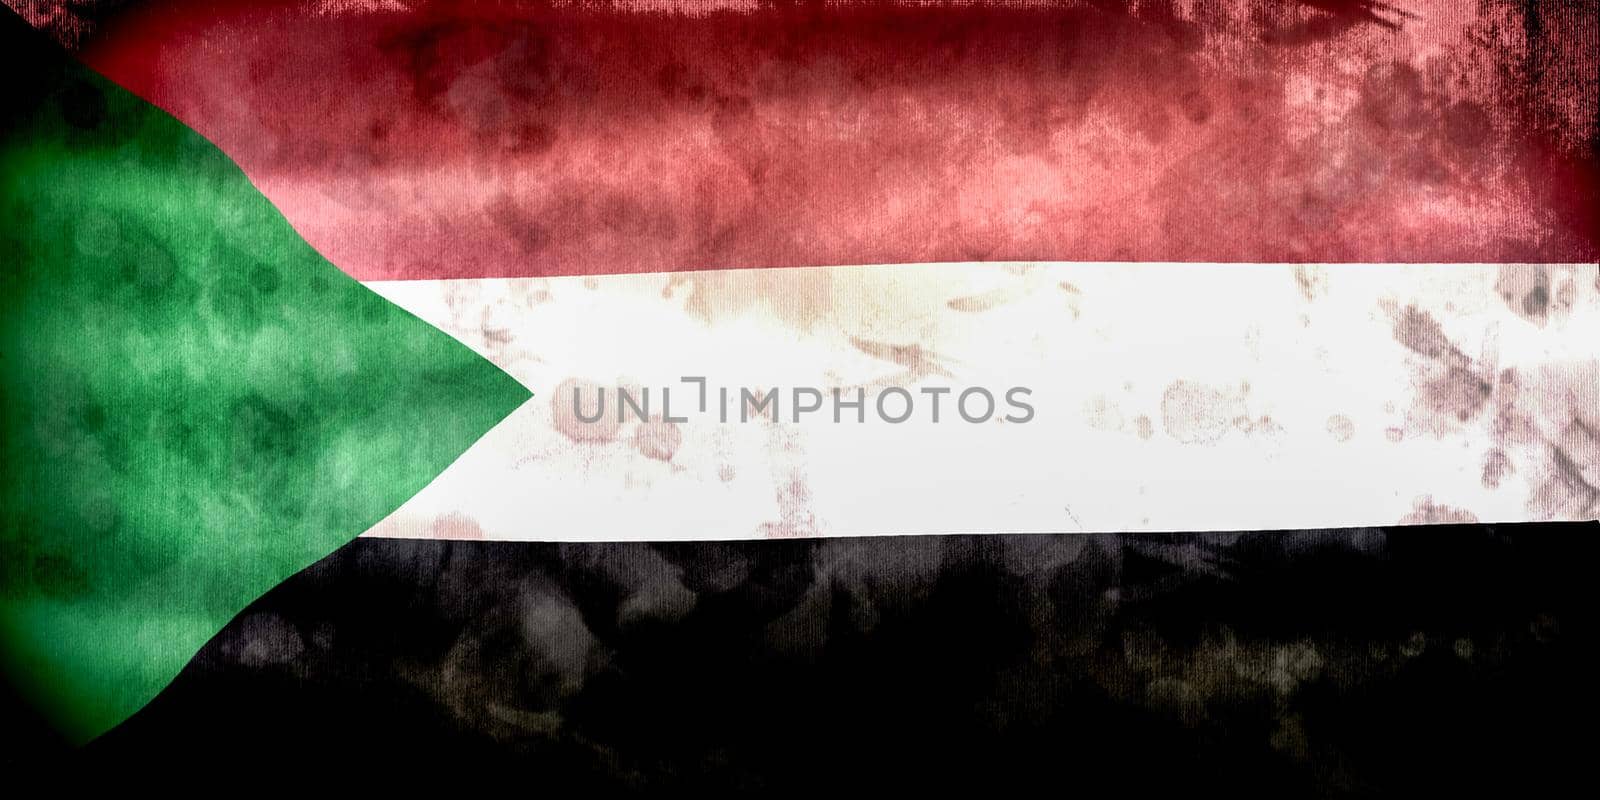 3D-Illustration of a Sudan flag - realistic waving fabric flag by MP_foto71